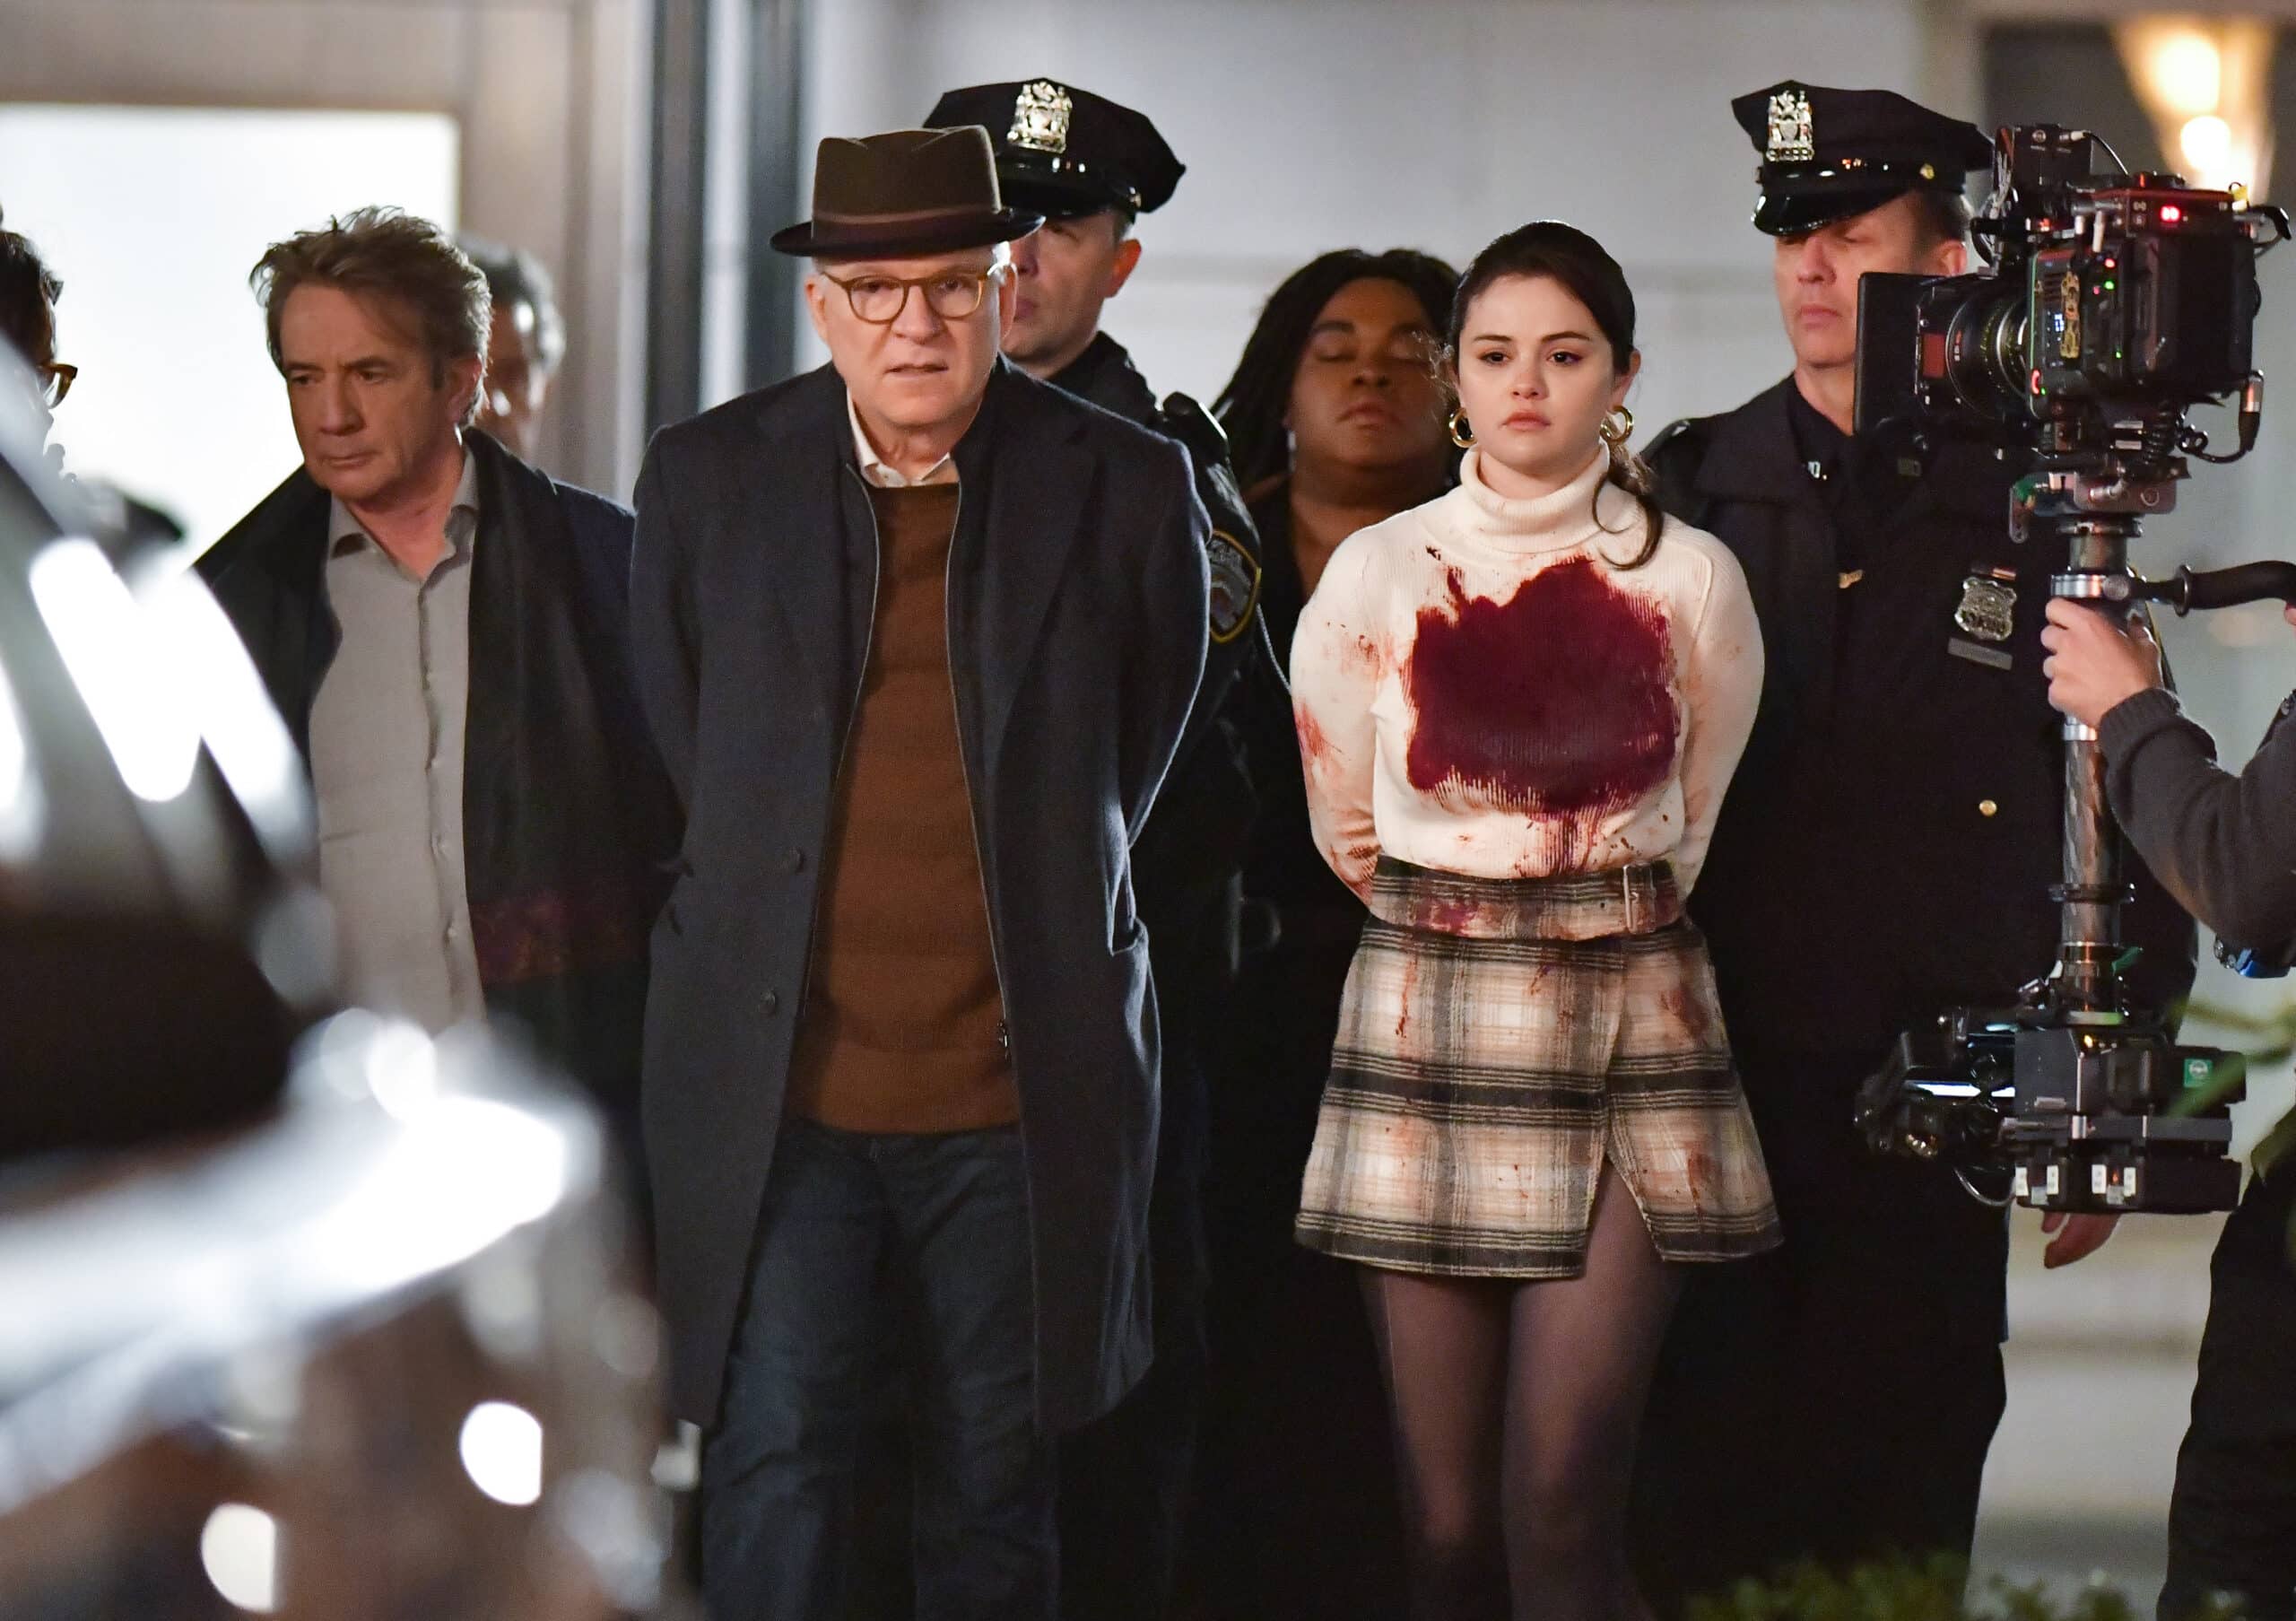 NEW YORK, NEW YORK - APRIL 10: Martin Short, Steve Martin and Selena Gomez seen on the set of 'Only Murders in the Building' on the Upper West Side on April 10, 2021 in New York City.